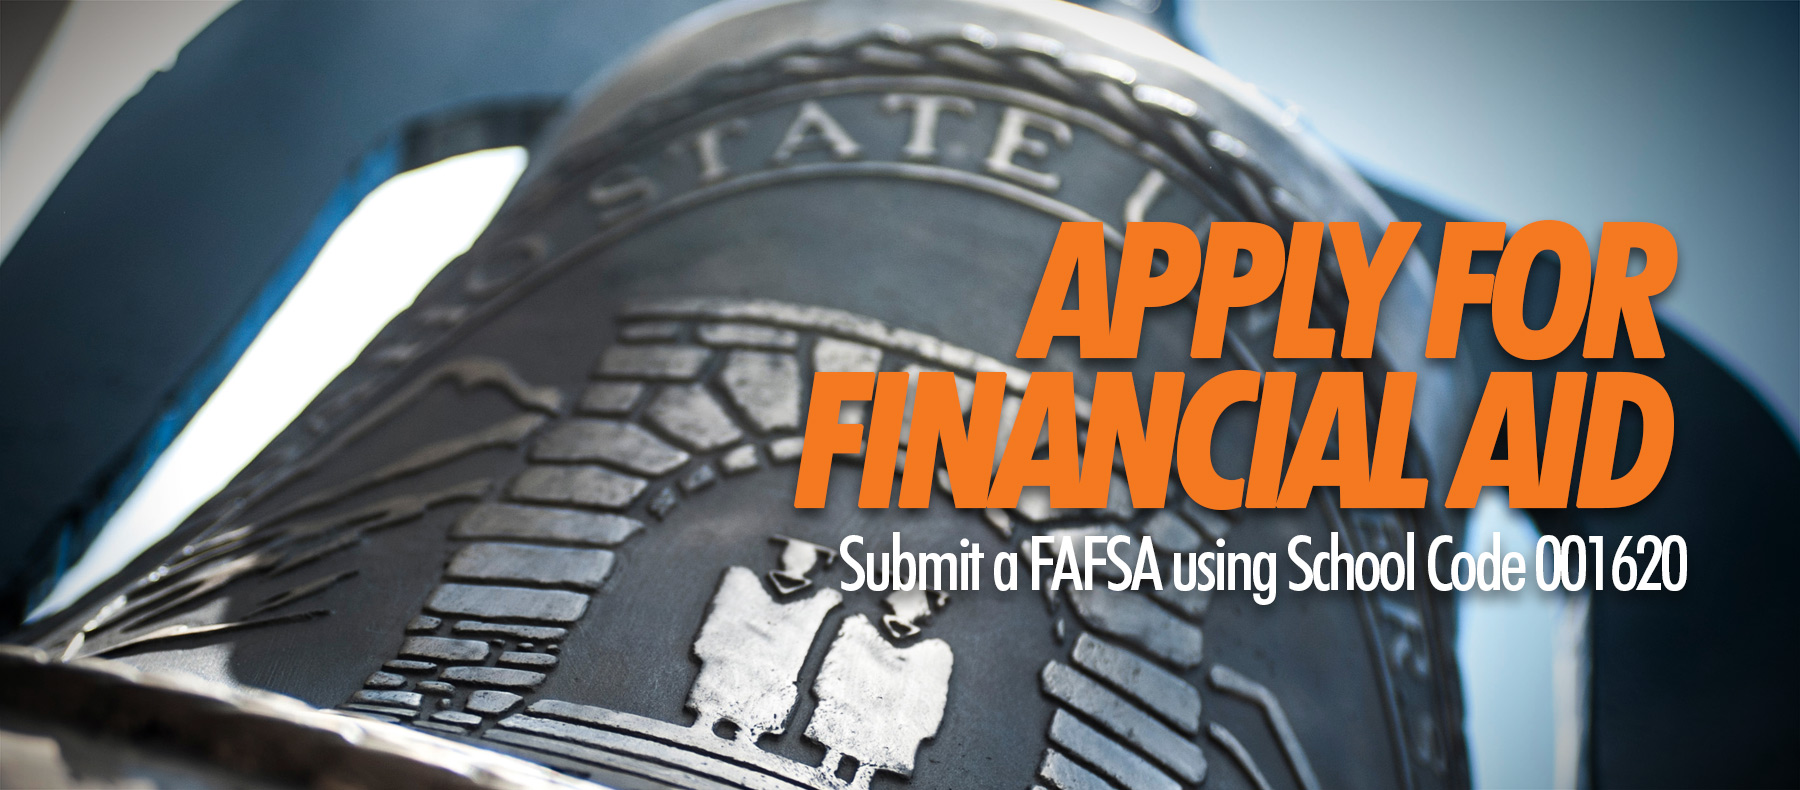 Apply for Financial Aid, Submit a FAFSA using School Code 001620